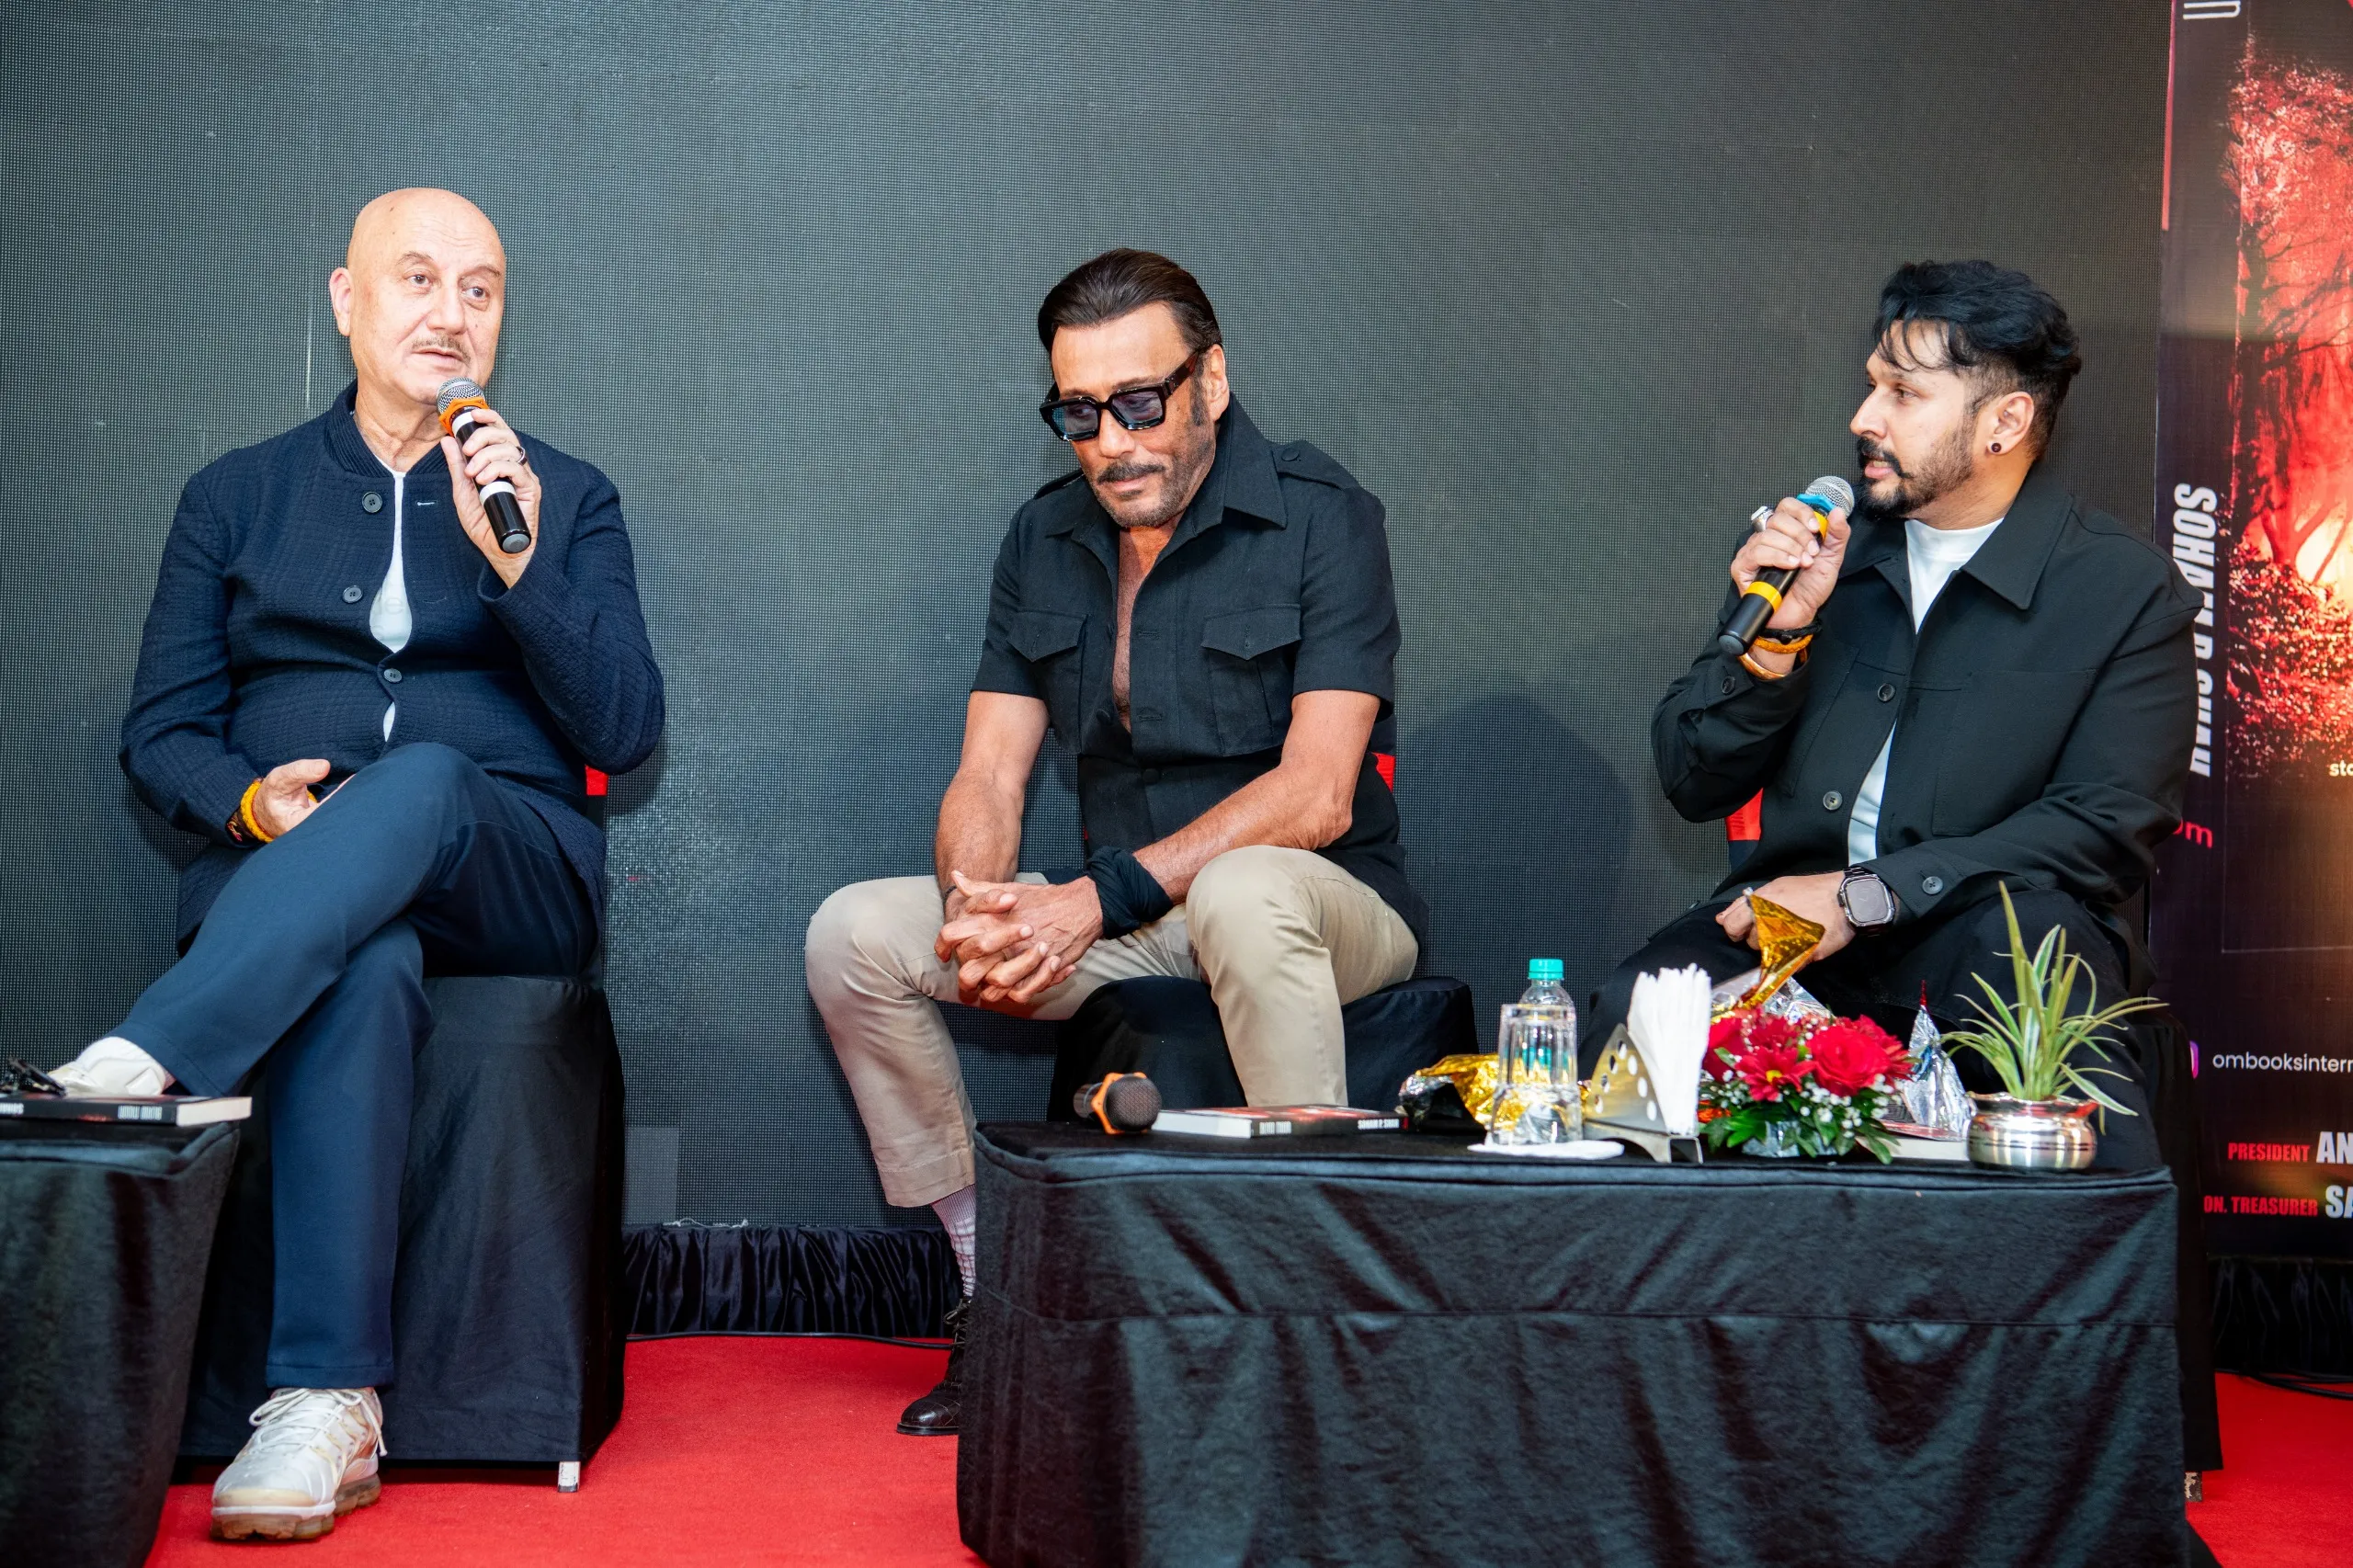 Director Soham Shah Debut Novel Blood Moon Launched by Anupam Kher and Jackie Shroff in a Star Studded Event 